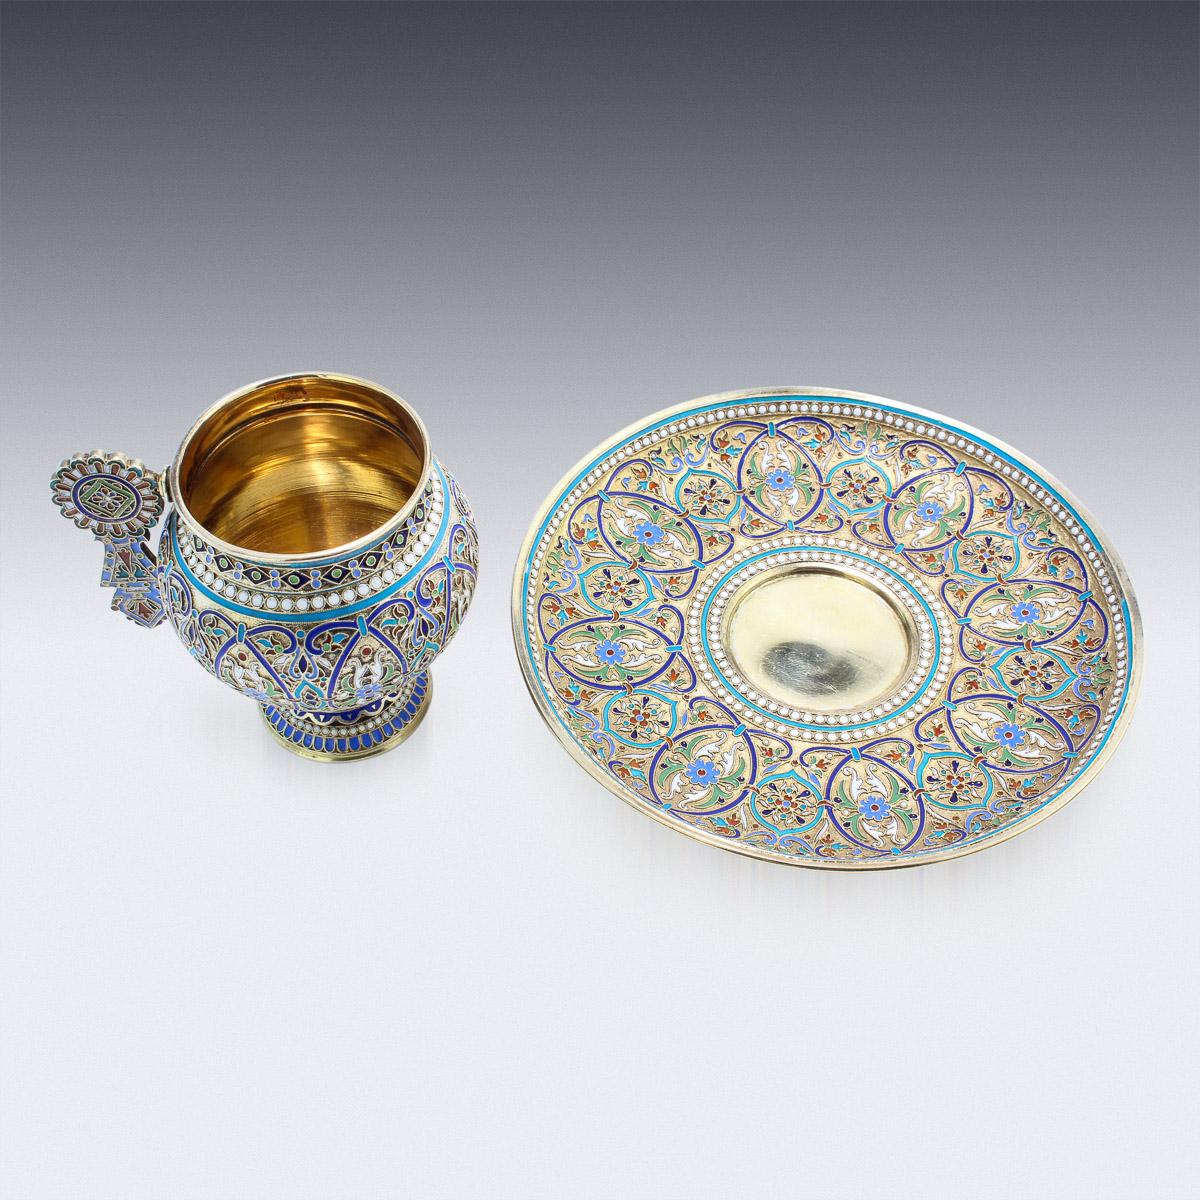 19th Century Imperial Russian Solid Silver-Gilt & Enamel Cup on Saucer, c.1887 2